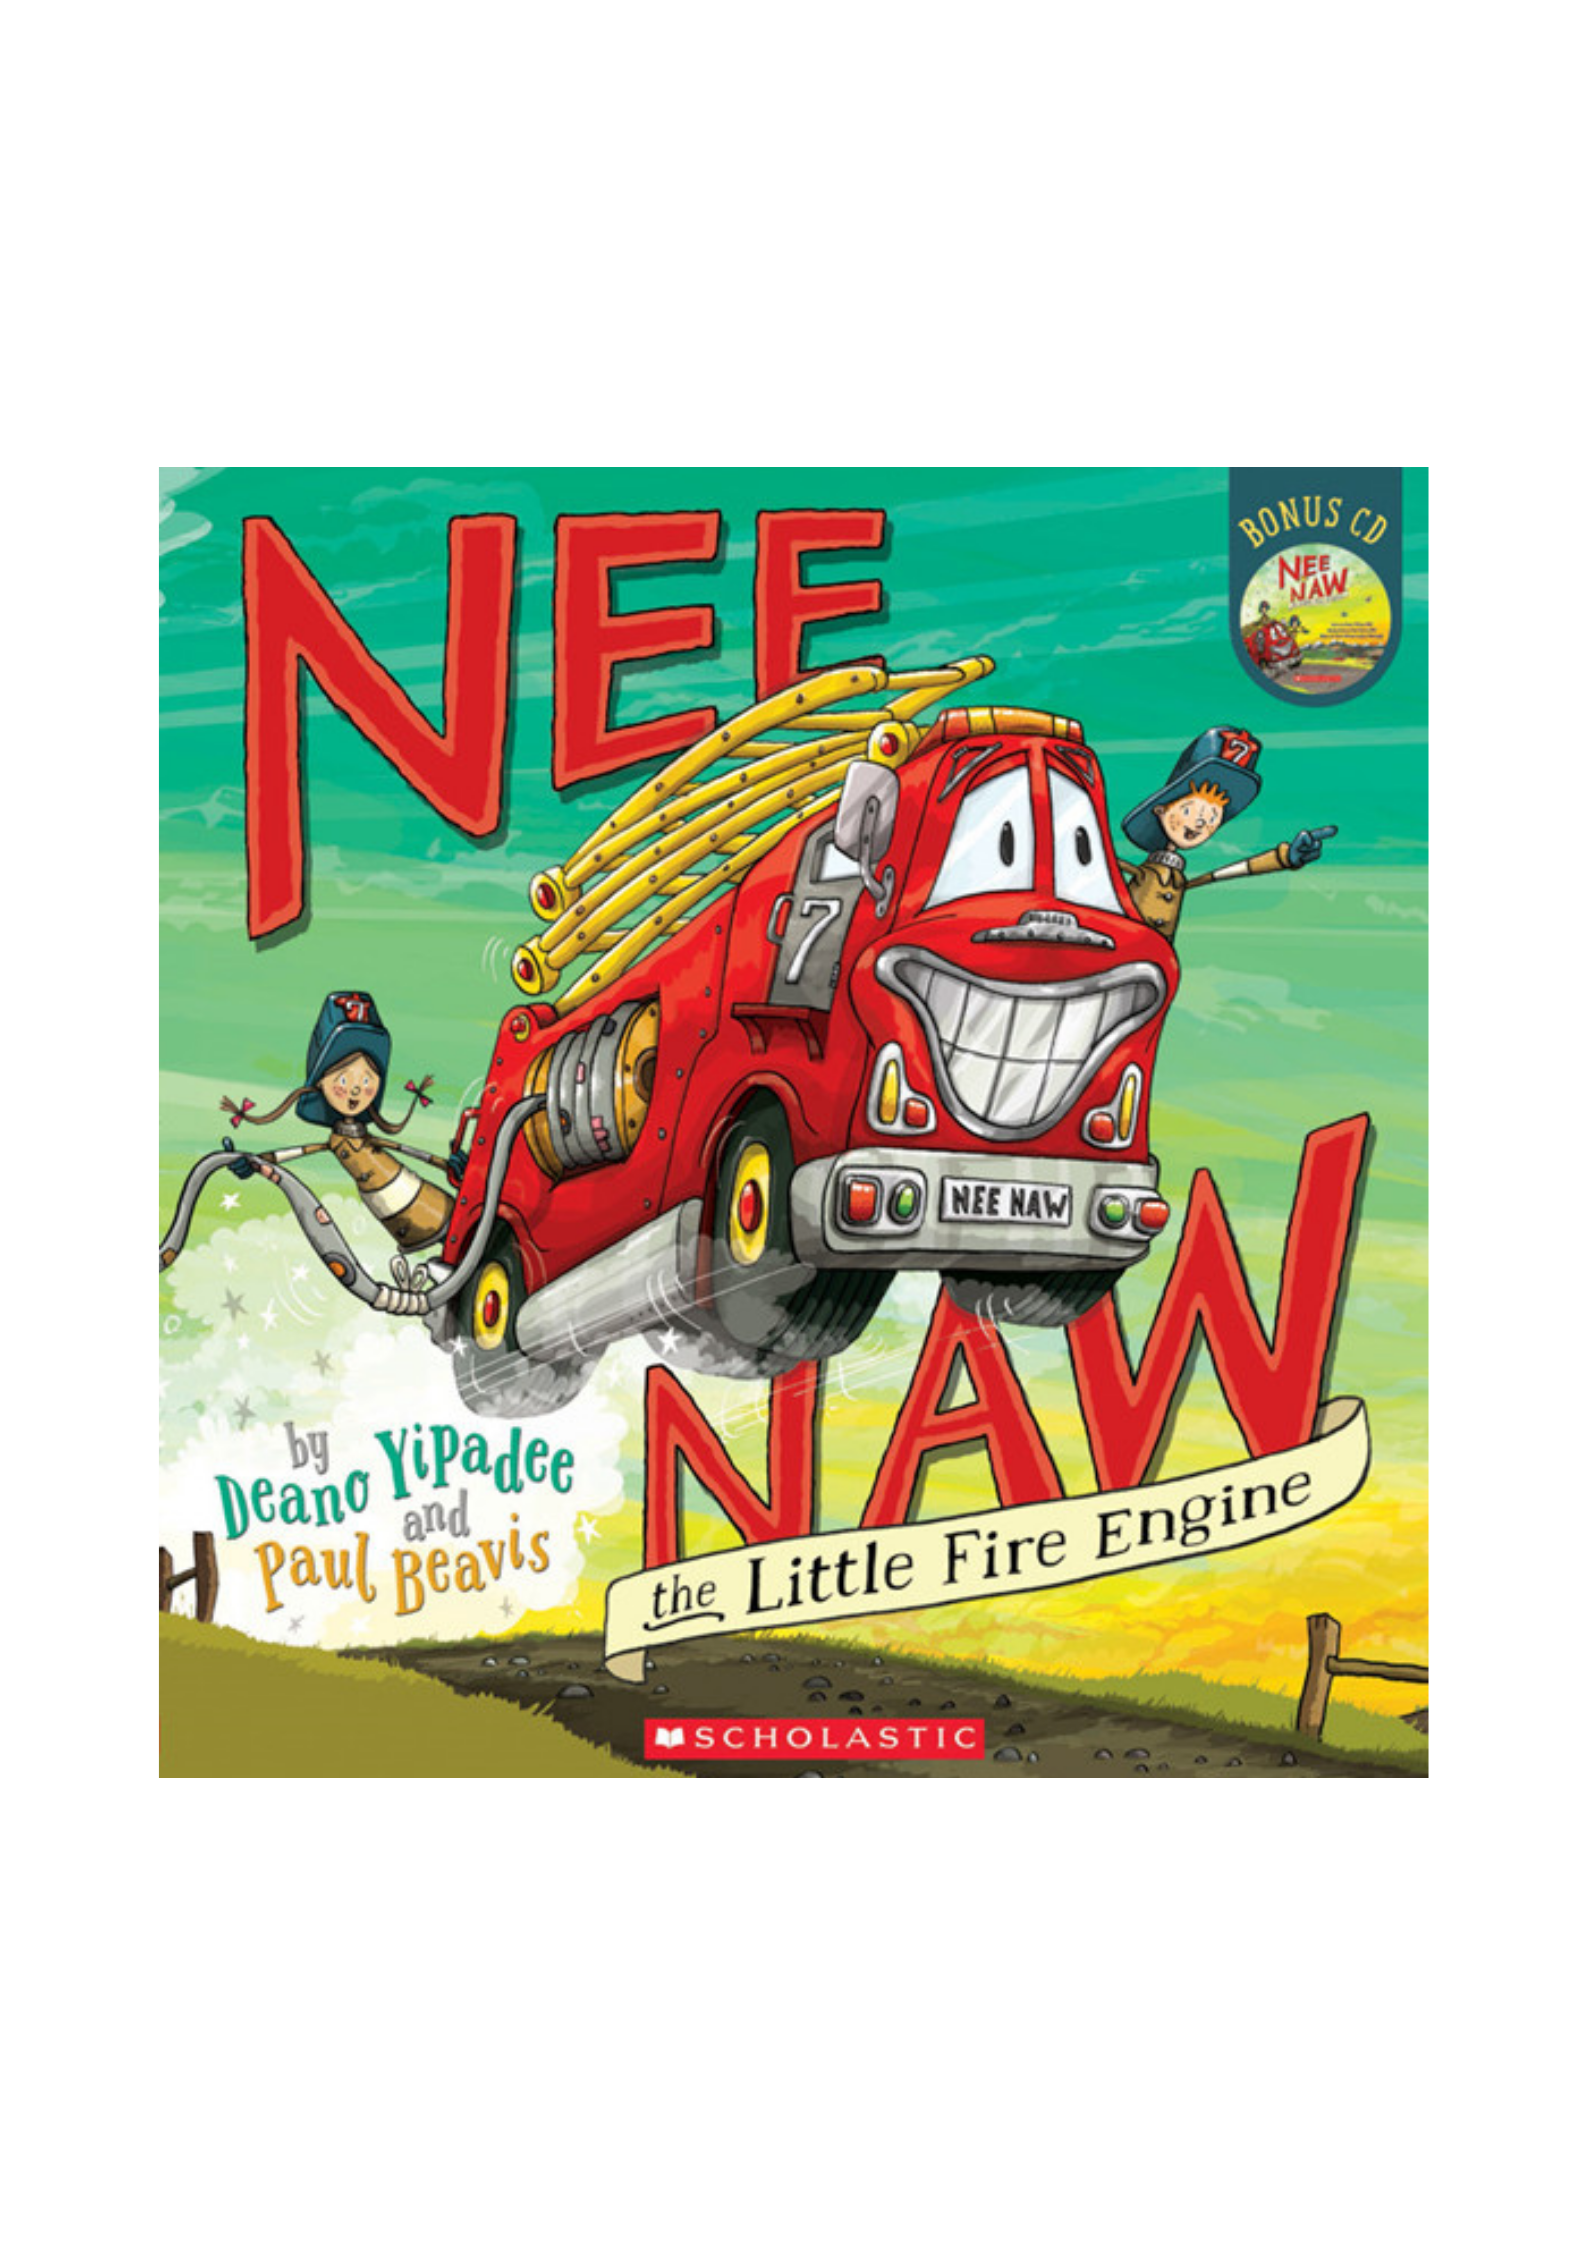 Nee Naw – the Little Fire Engine (2021)